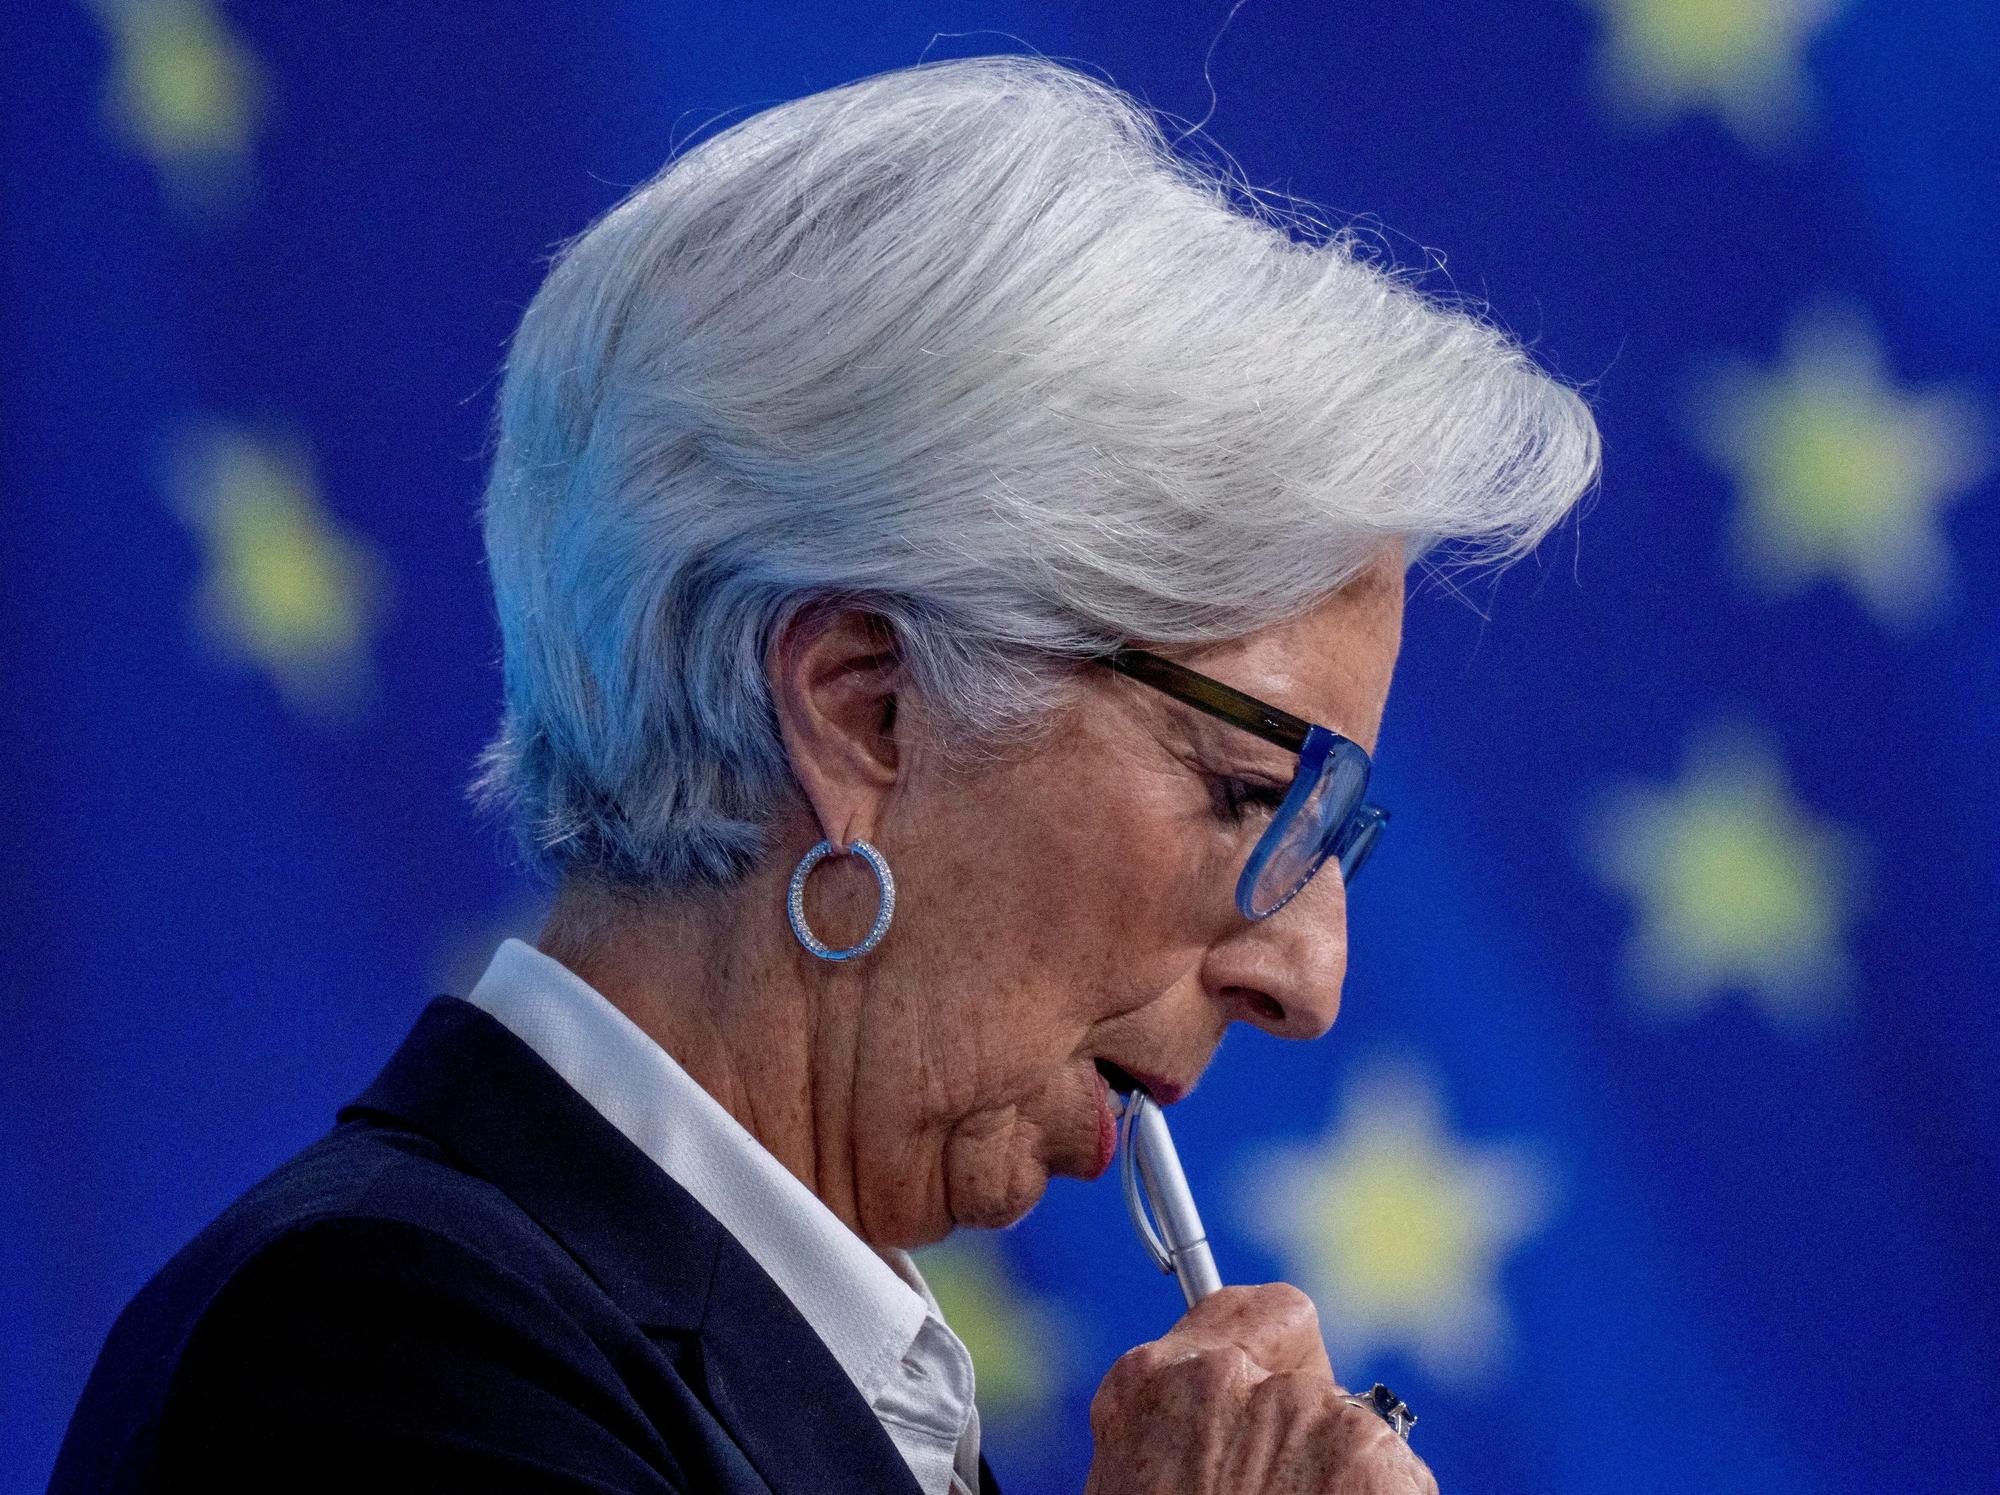 FILE PHOTO: President of the European Central Bank, Christine Lagarde, attends a news conference following a meeting of the governing council in Frankfurt, Germany February 3, 2022./File Photo